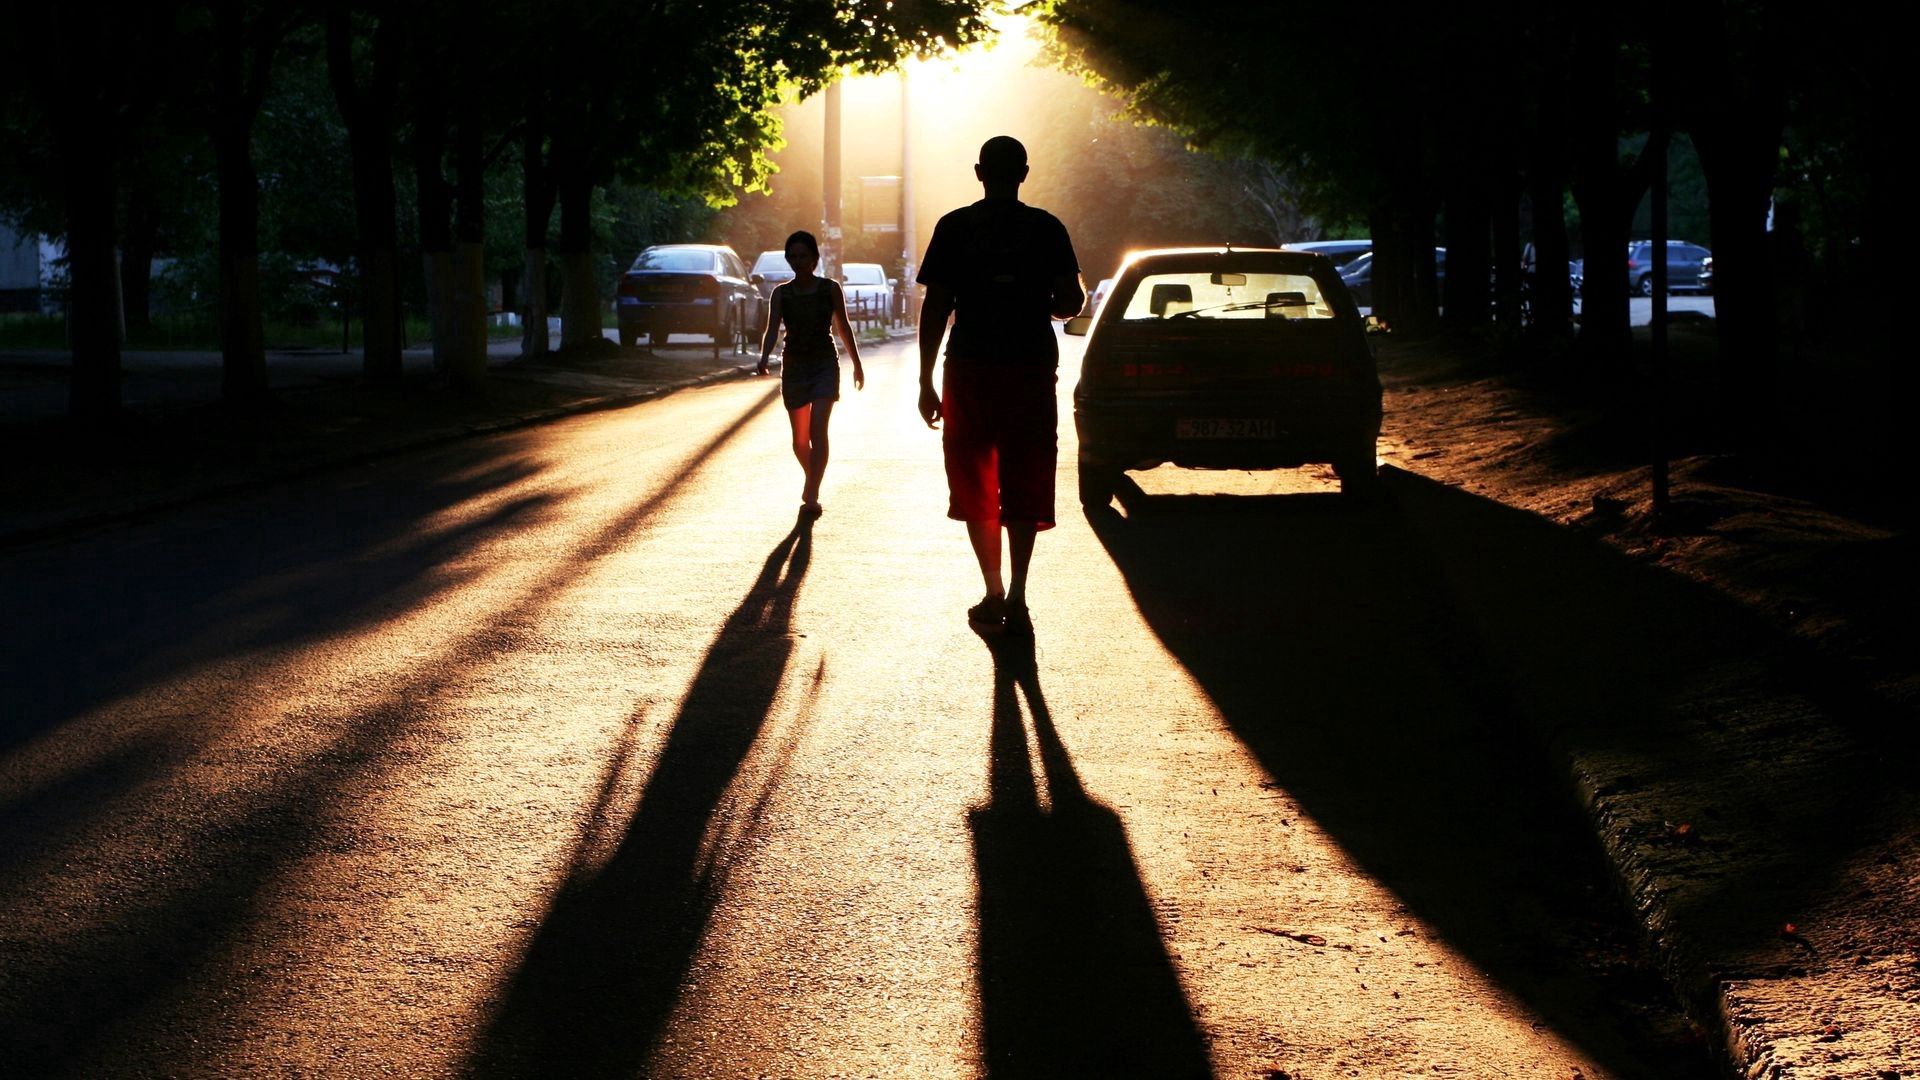 people, cars, miscellanea, miscellaneous, road, silhouettes, shadow, evening HD for desktop 1080p